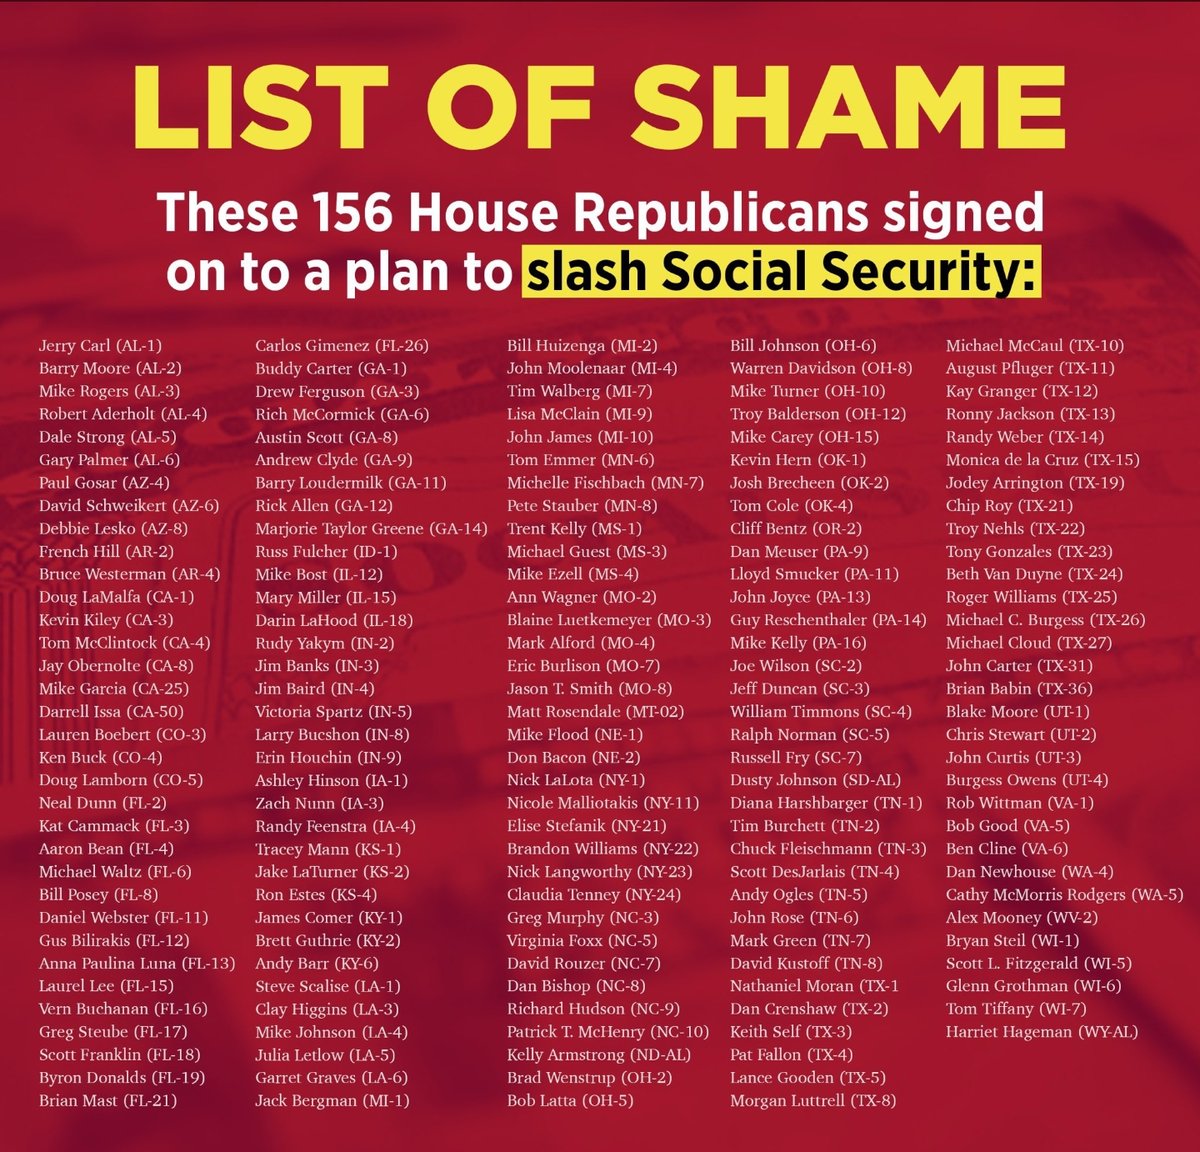 If you only retweet ONE thing today, let it be this list of 156 House Republicans who voted to raise the retirement age for Social Security to age 70. Don't let them get away with it. Make sure EVERYONE knows.